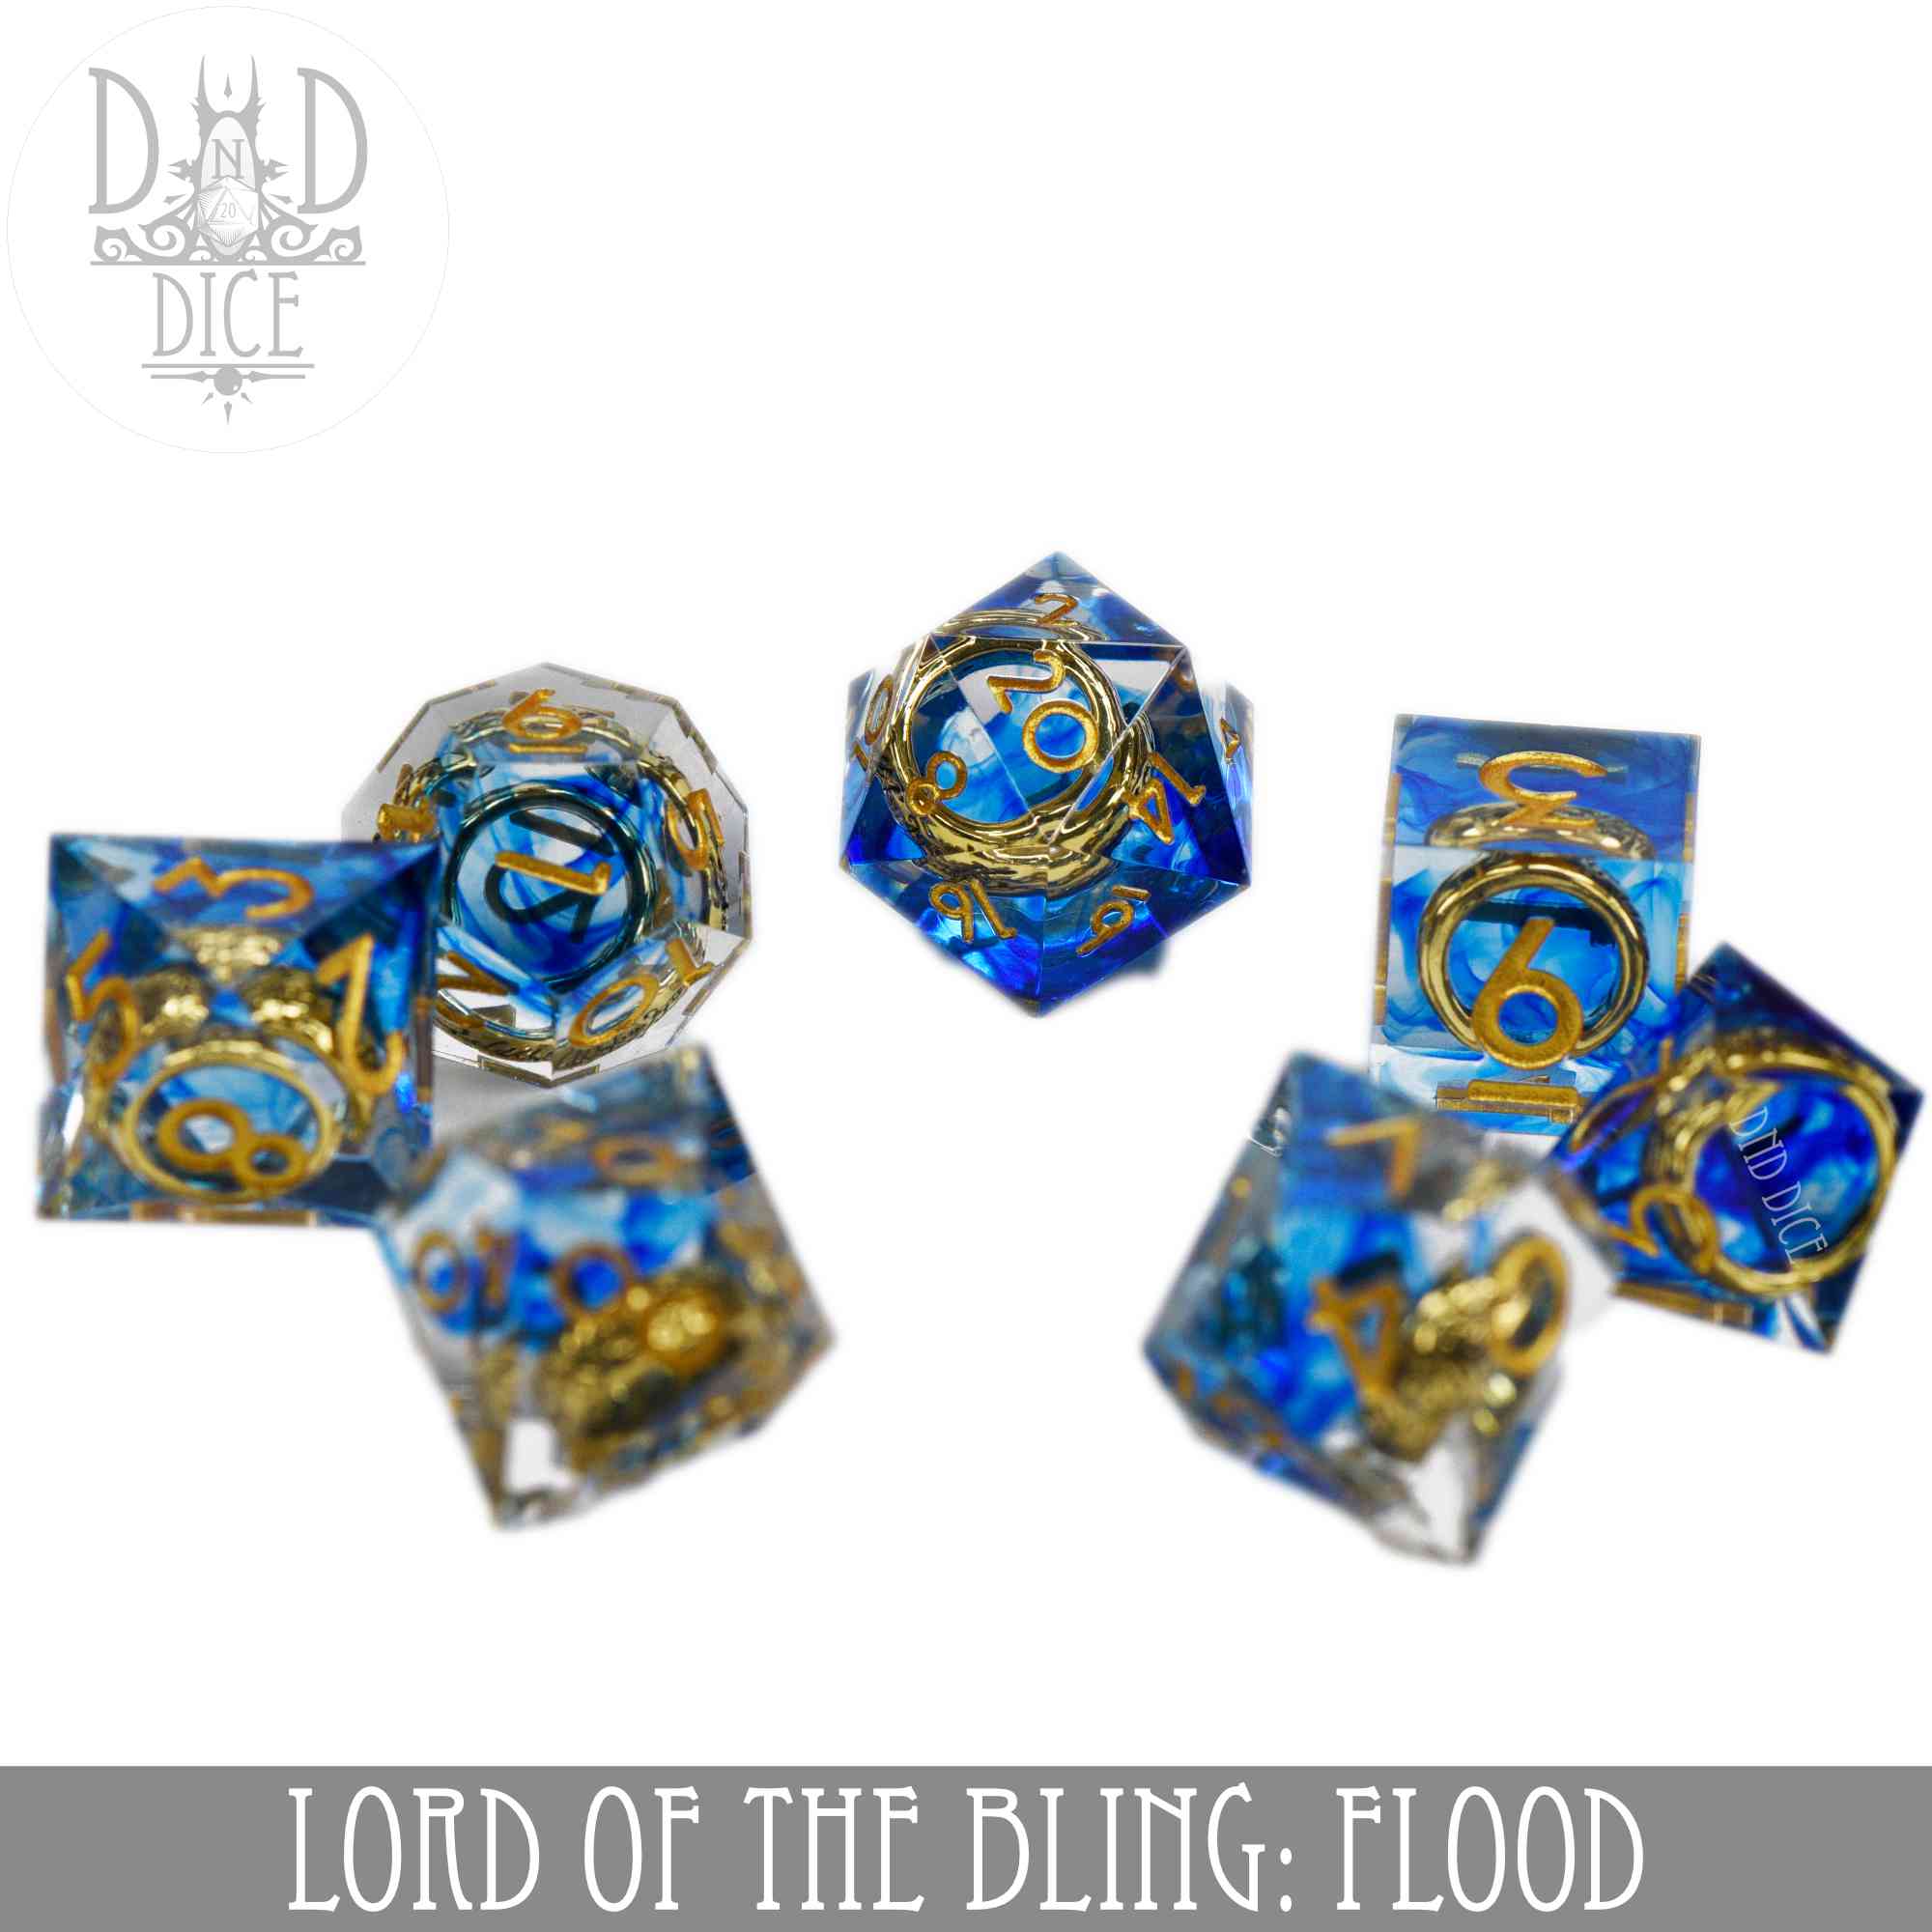 Lord of the Bling: Flood Handmade Dice Set